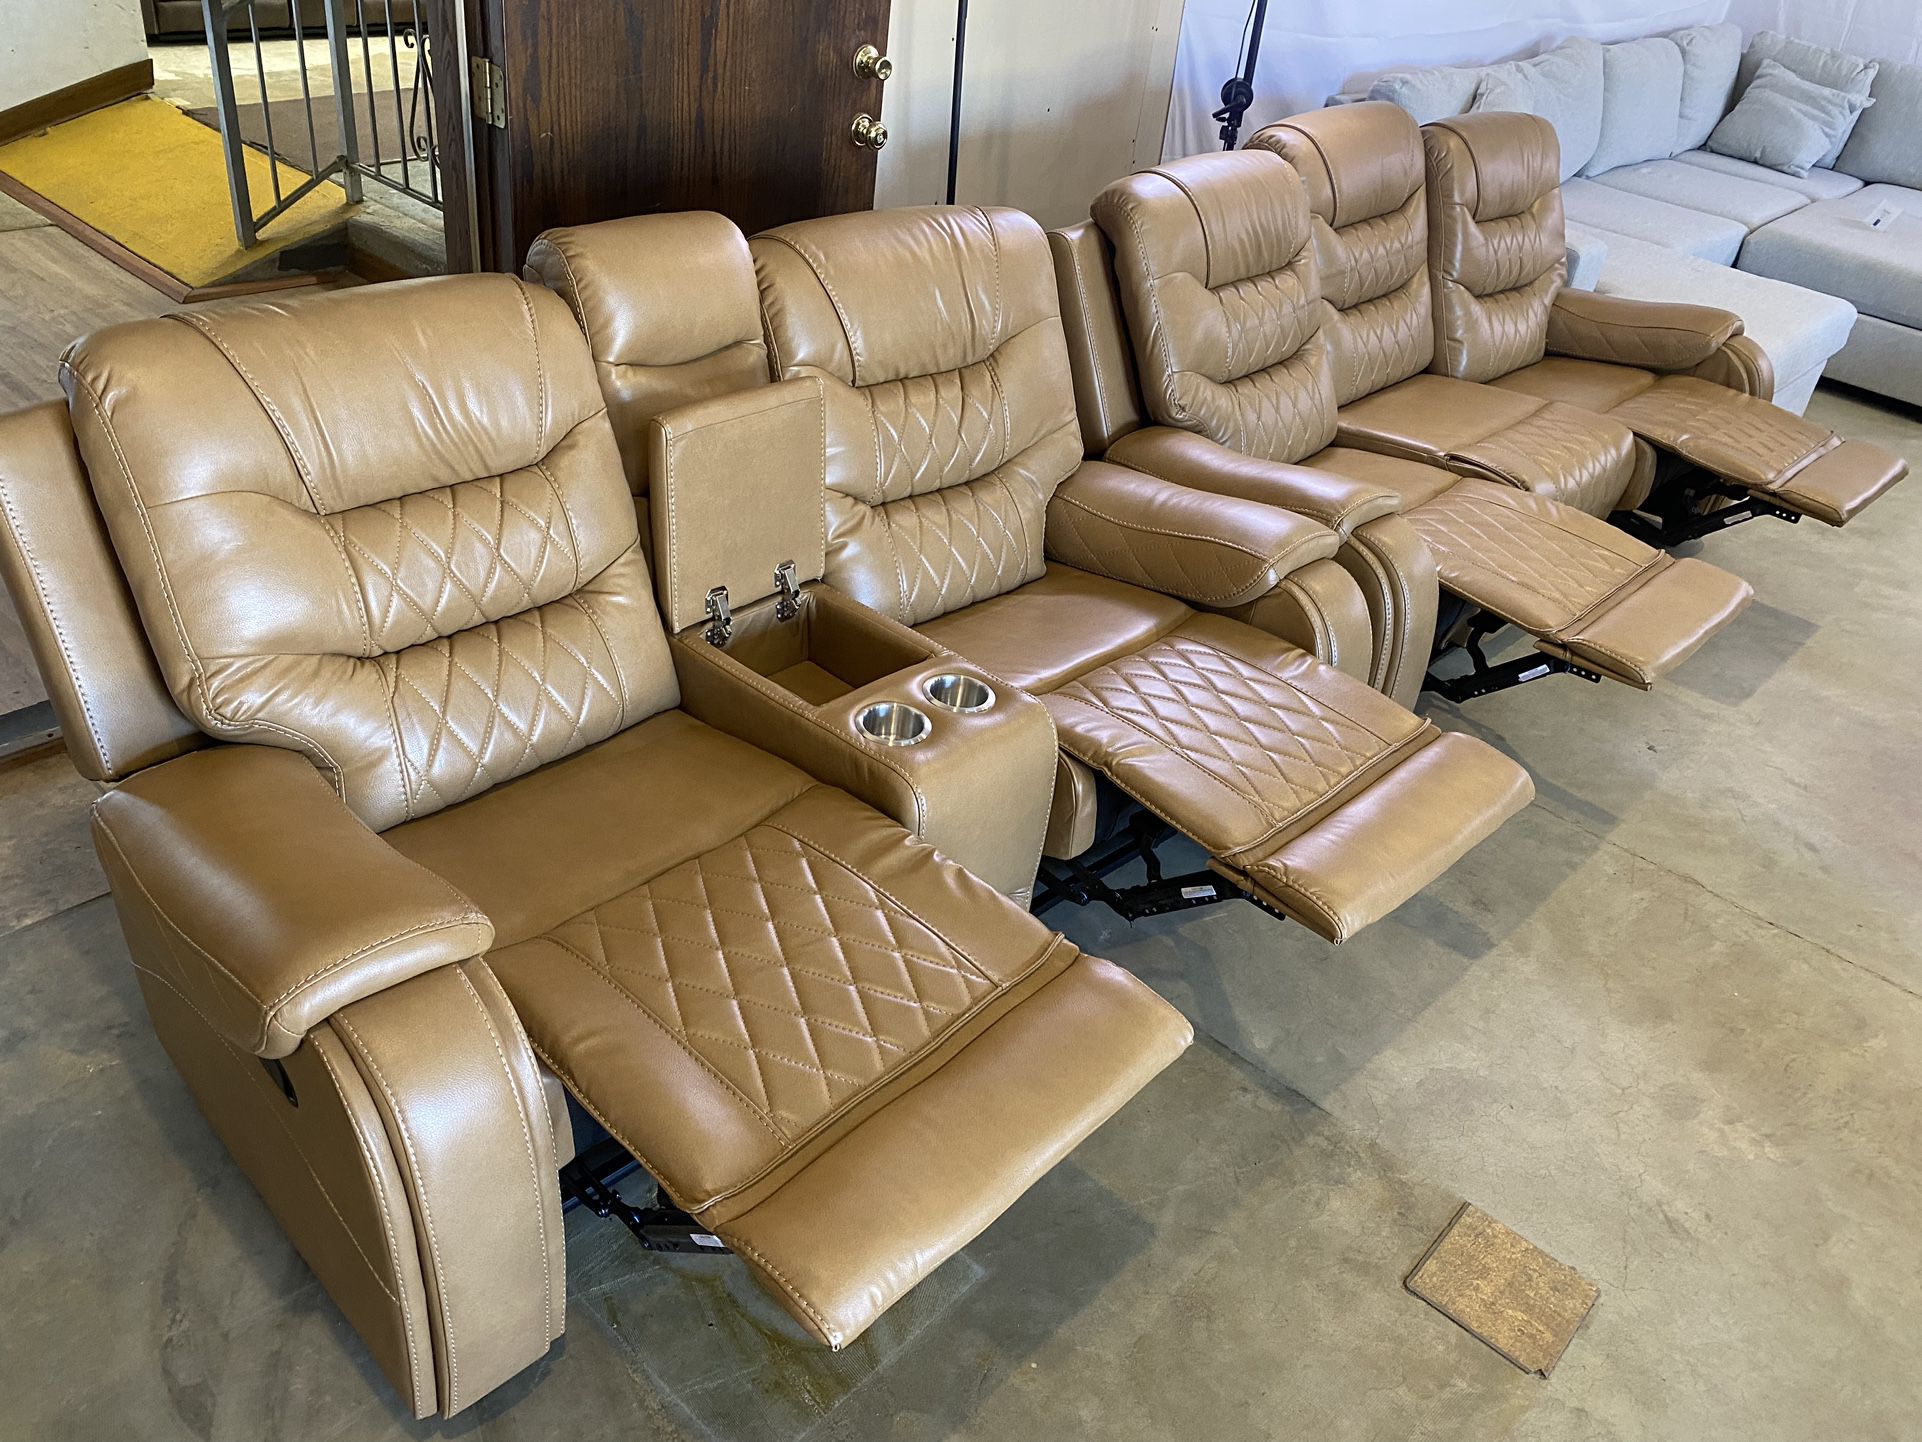 FREE DELIVERY AND INSTALLATION - NEW IN BOX! Sofa and Loveseat! Caramel Color Leather Recliners